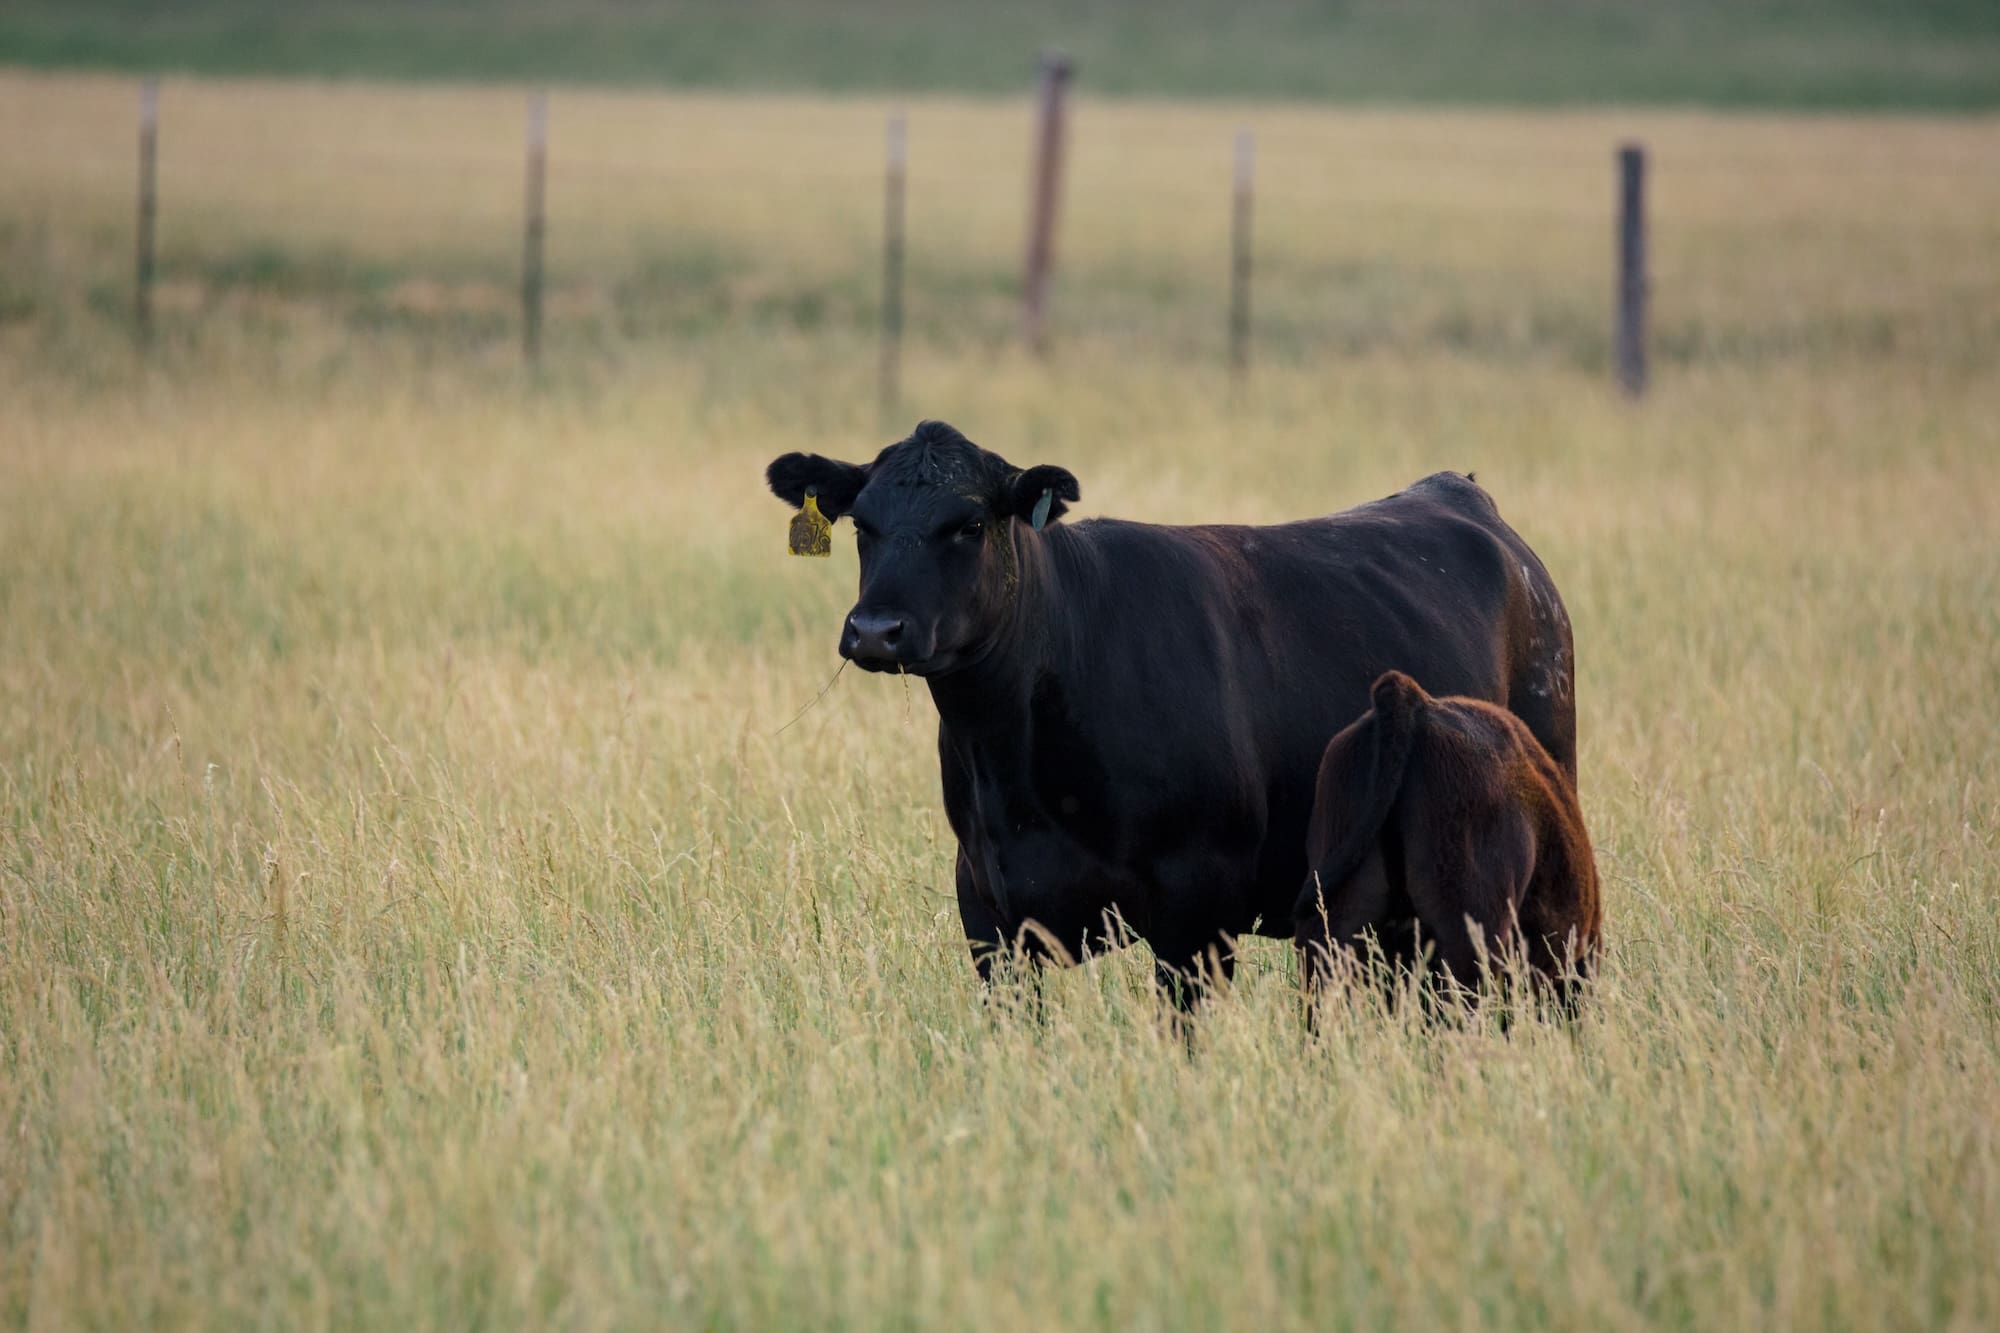 Black angus cows in rural farm pasture - what to look for when buying beef